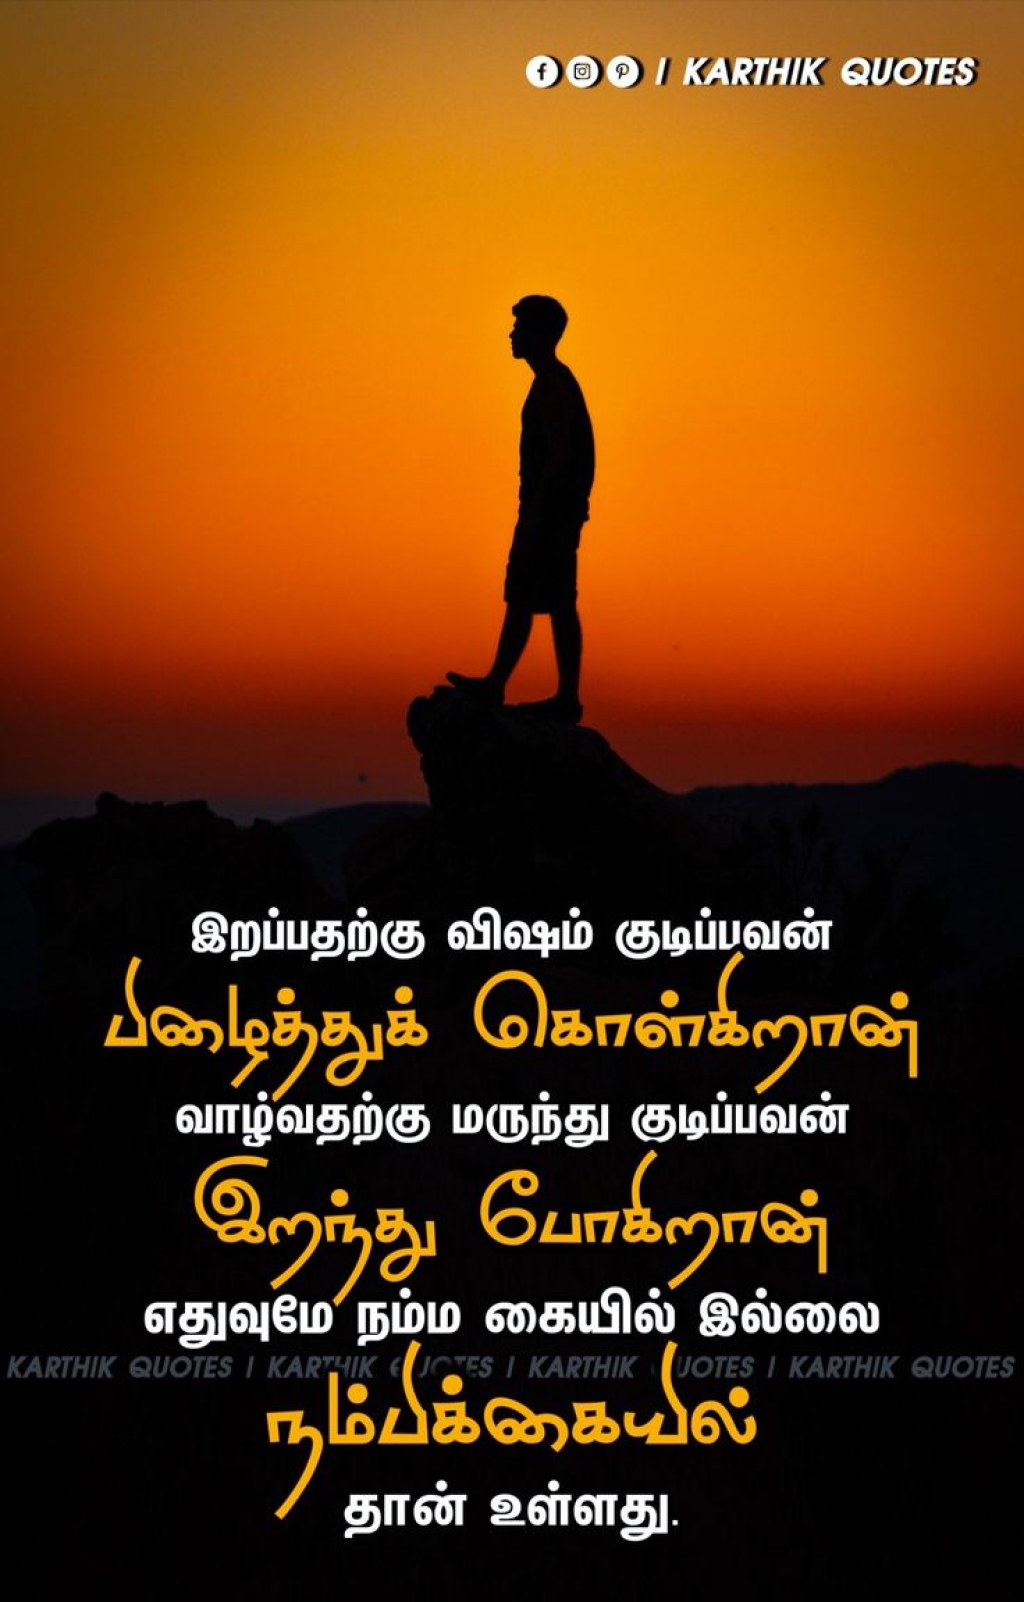 Picture of: Pin by 𝙅𝙊𝙆𝙀𝙍 𝙌𝙐𝙊𝙏𝙀𝙎 on Motivational Quotes in Tamil